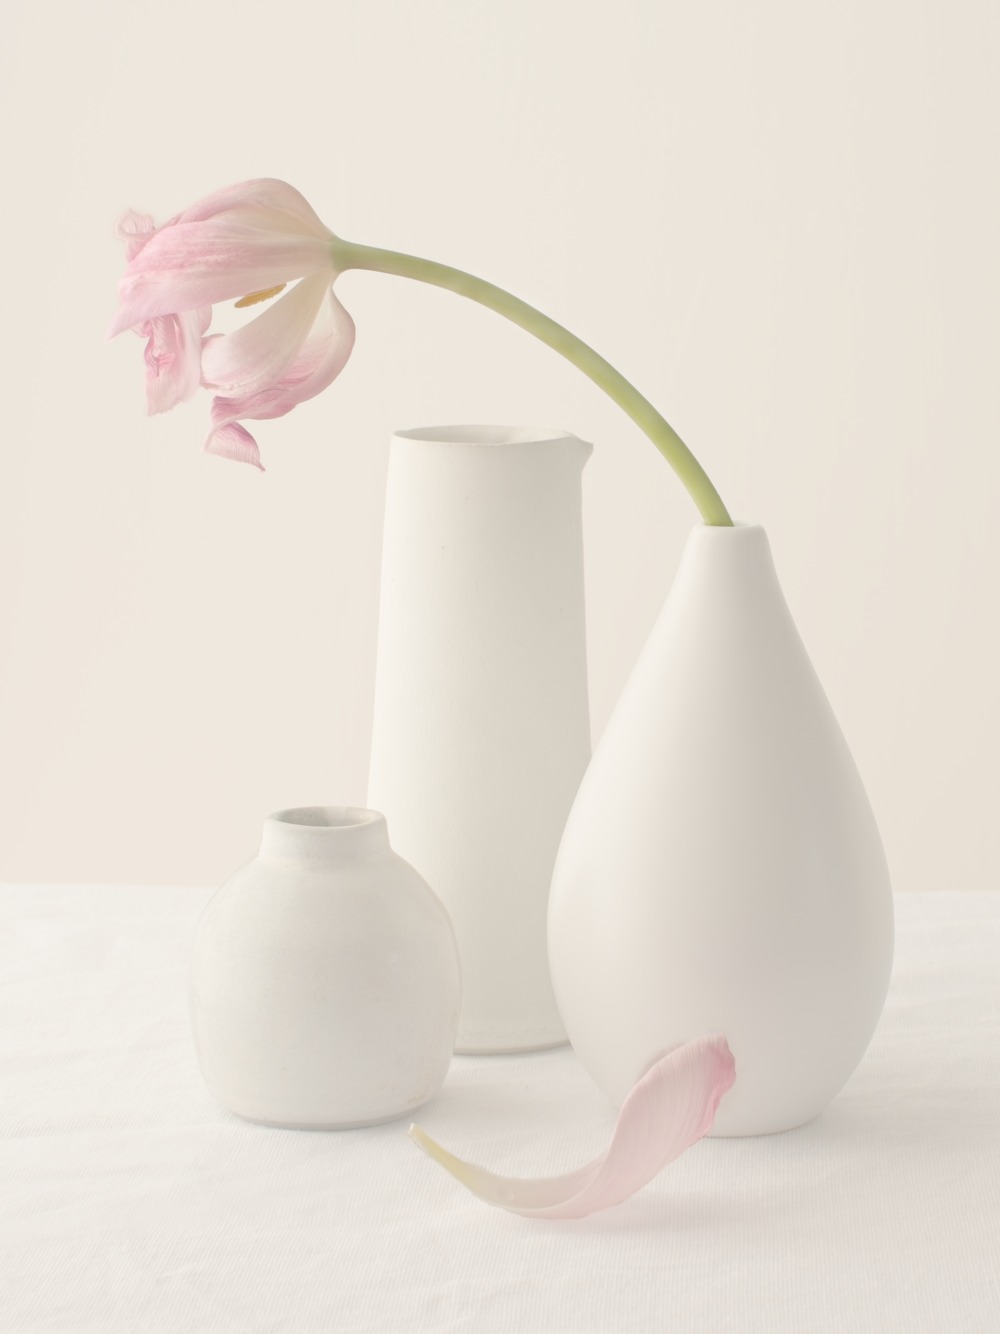 32 - Pale Dying Tulip by Kirsten Bax LRPS